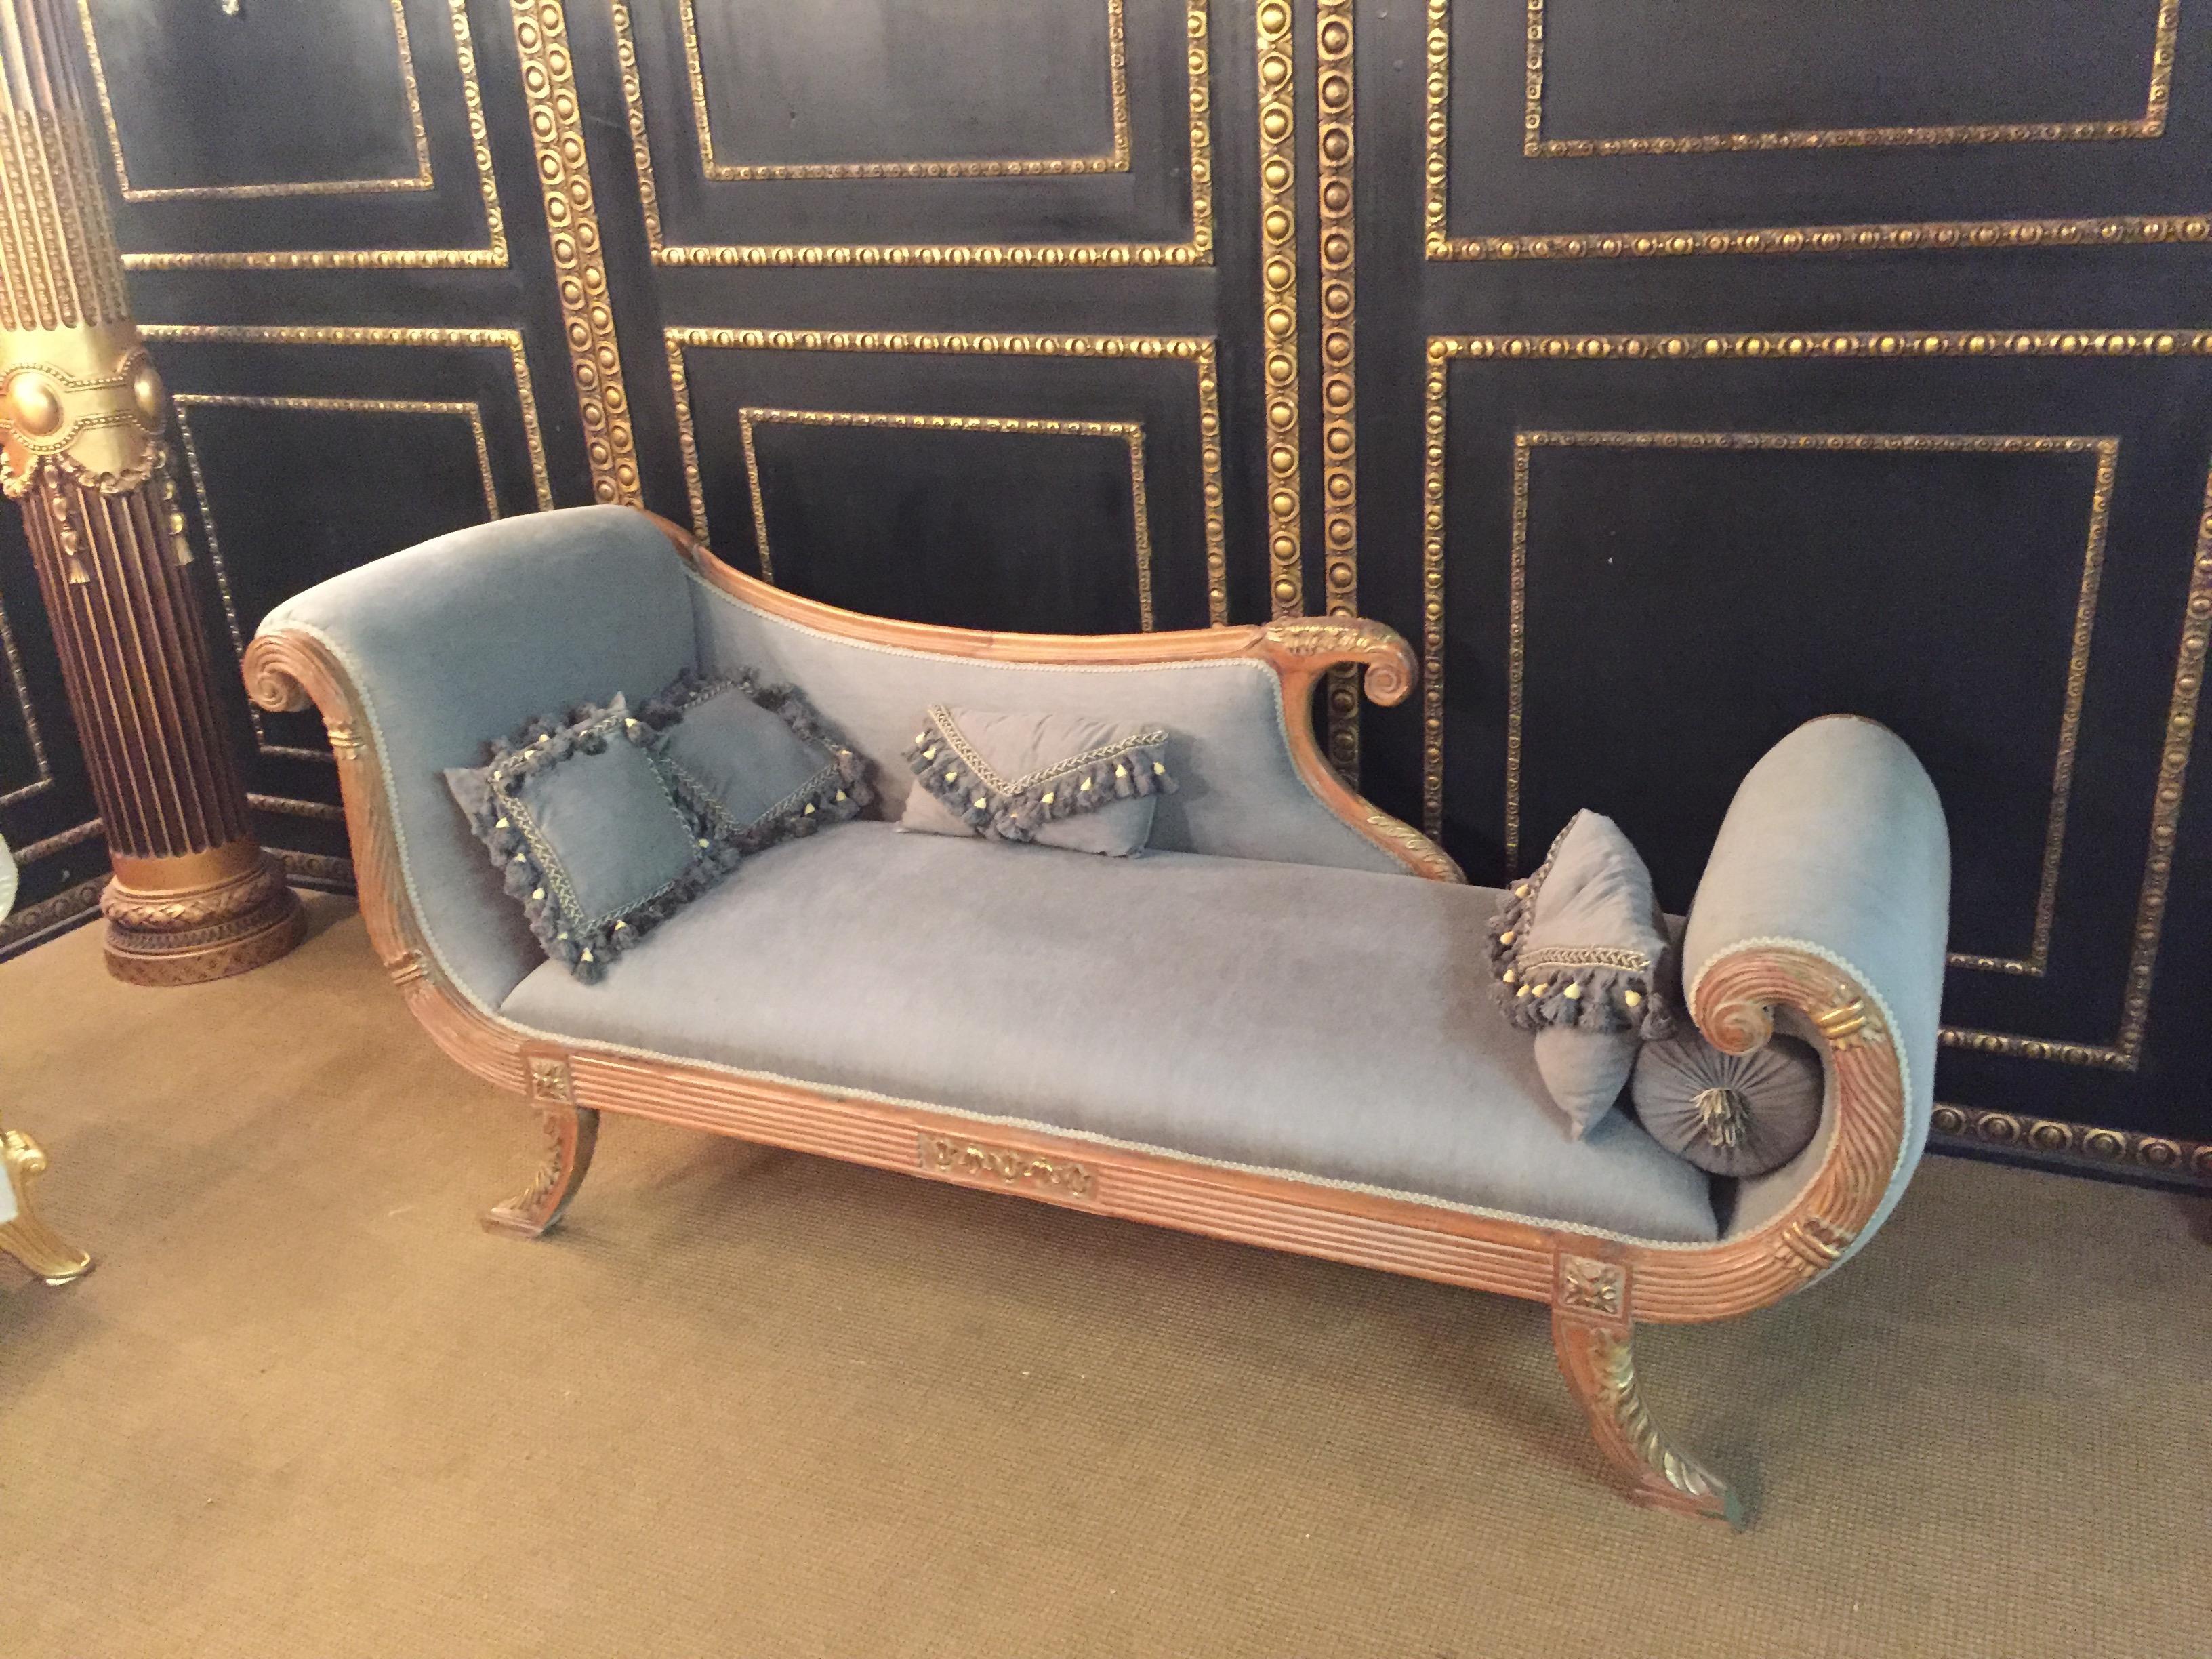 Hand-Crafted Elegant Chaise Longue in Empire Style